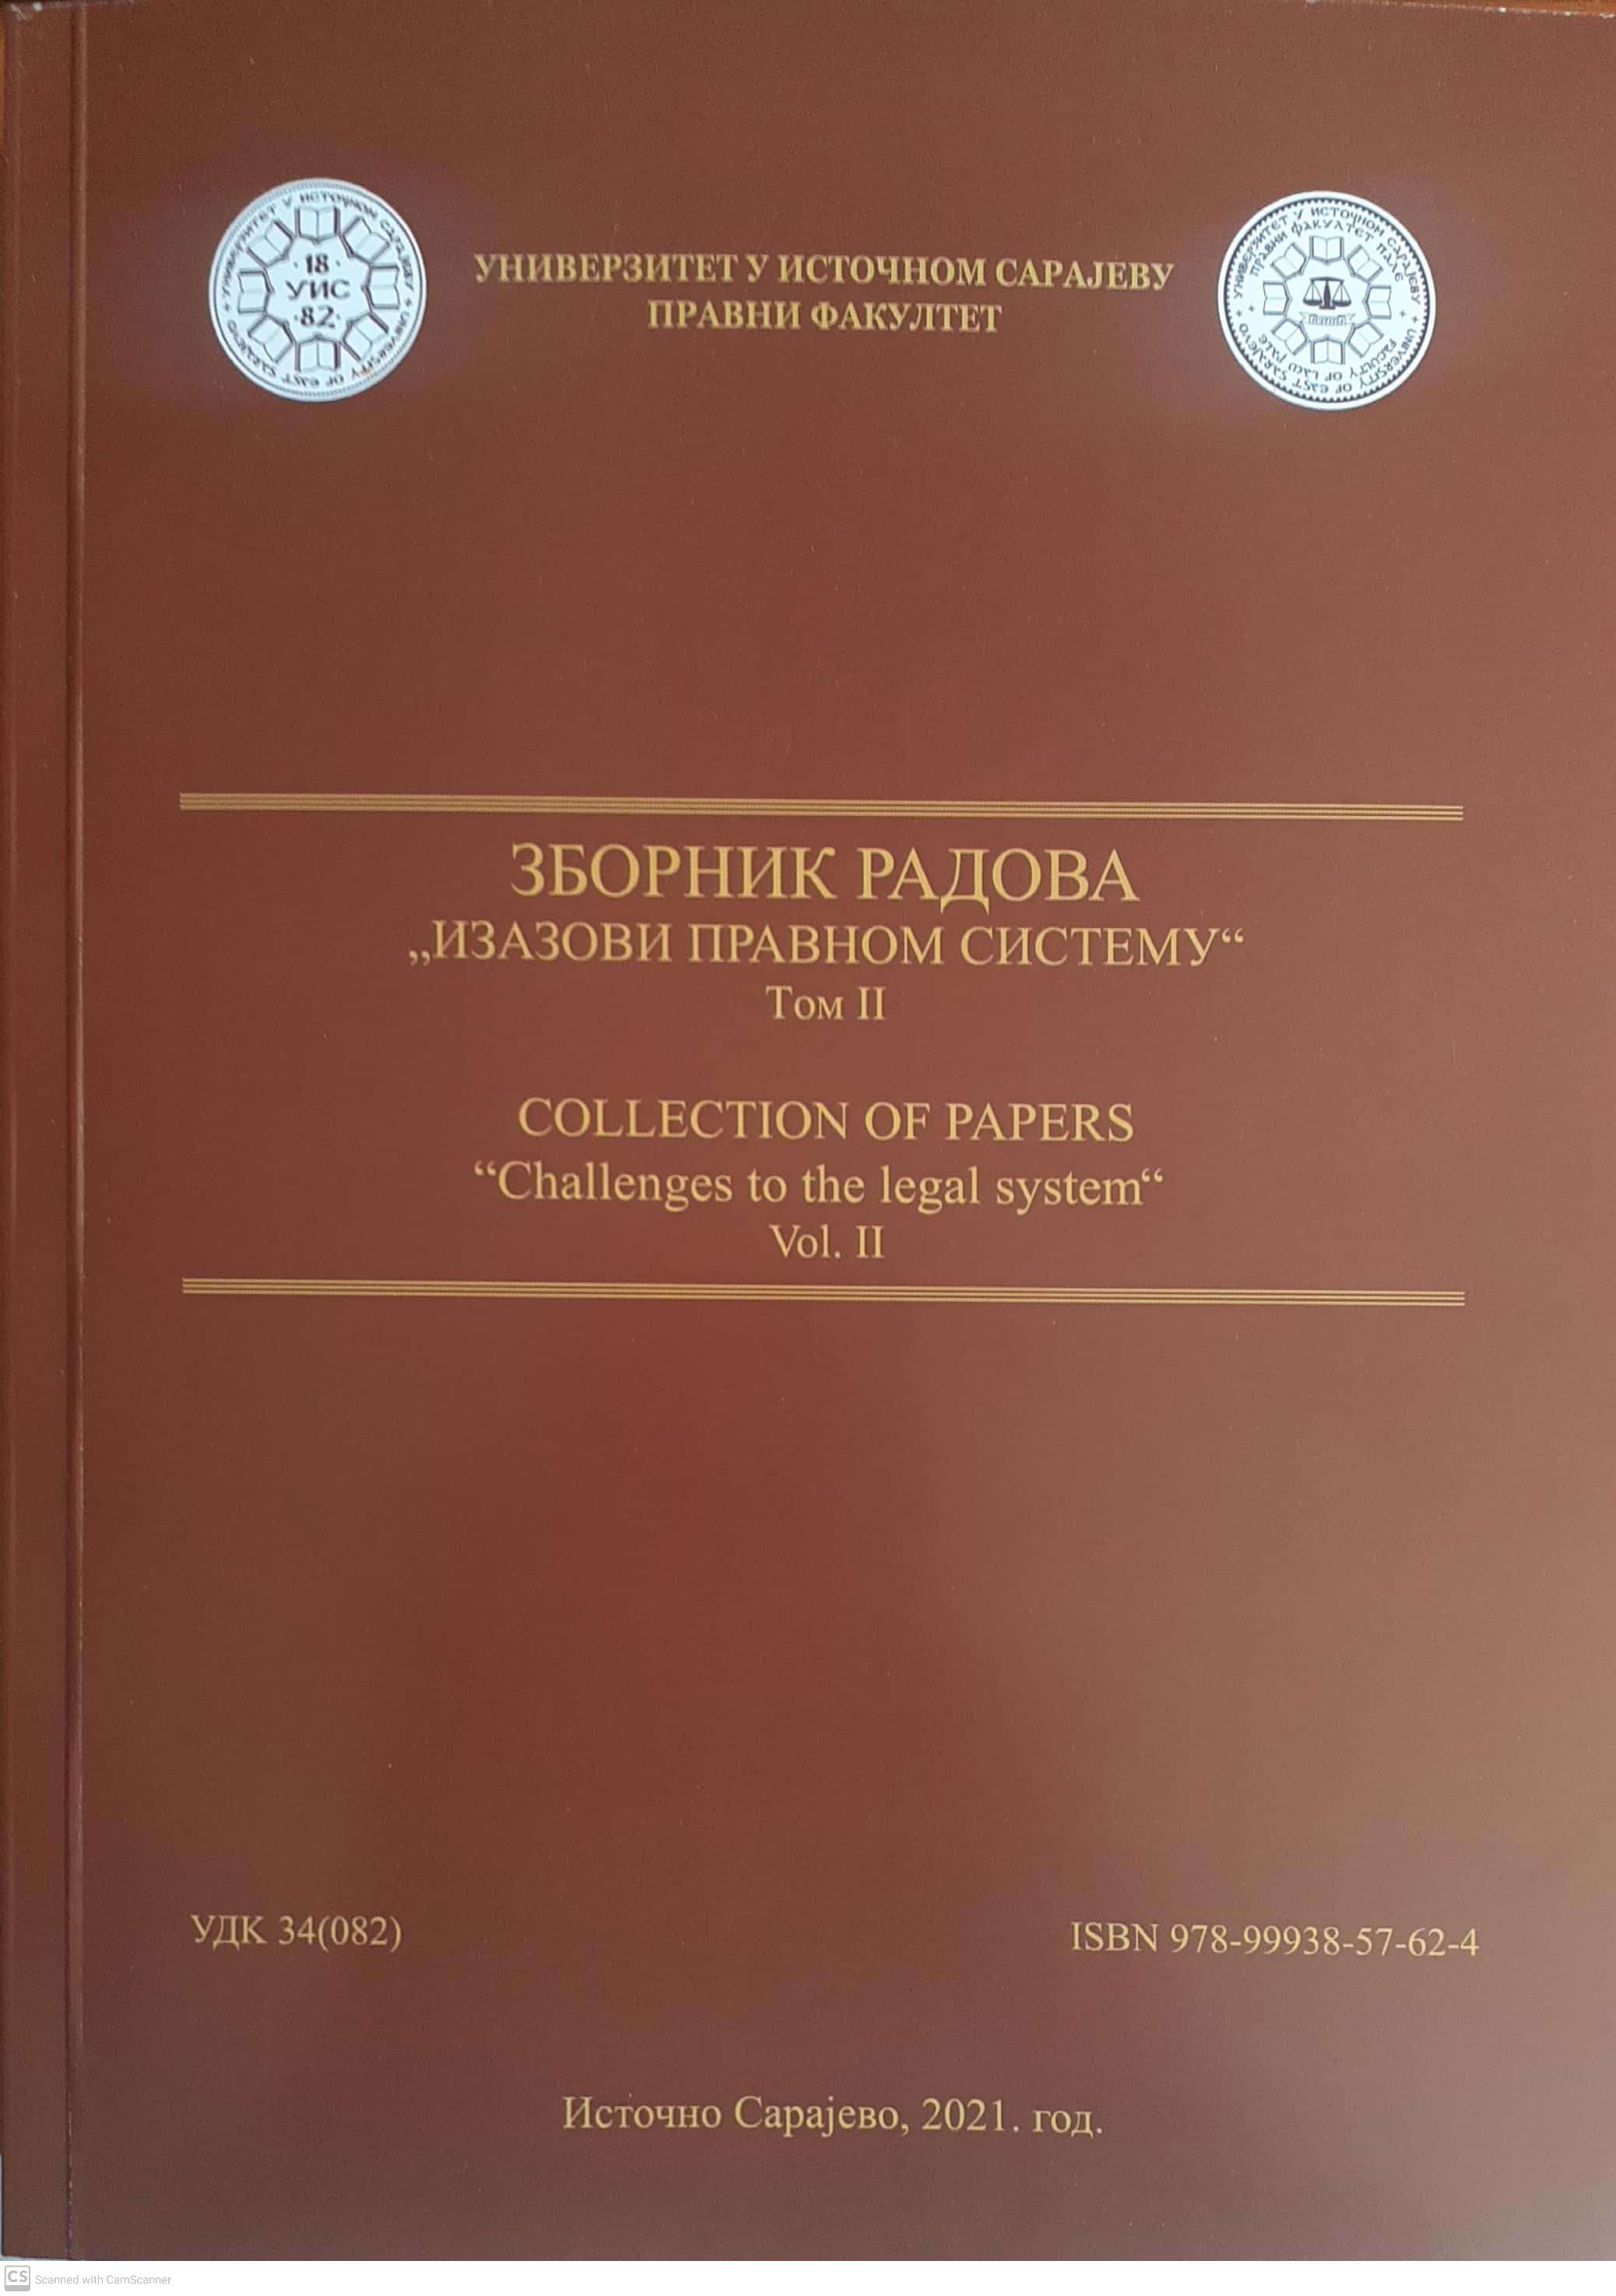 Collection of papers "Challenges to the Legal System" Vol II Cover Image